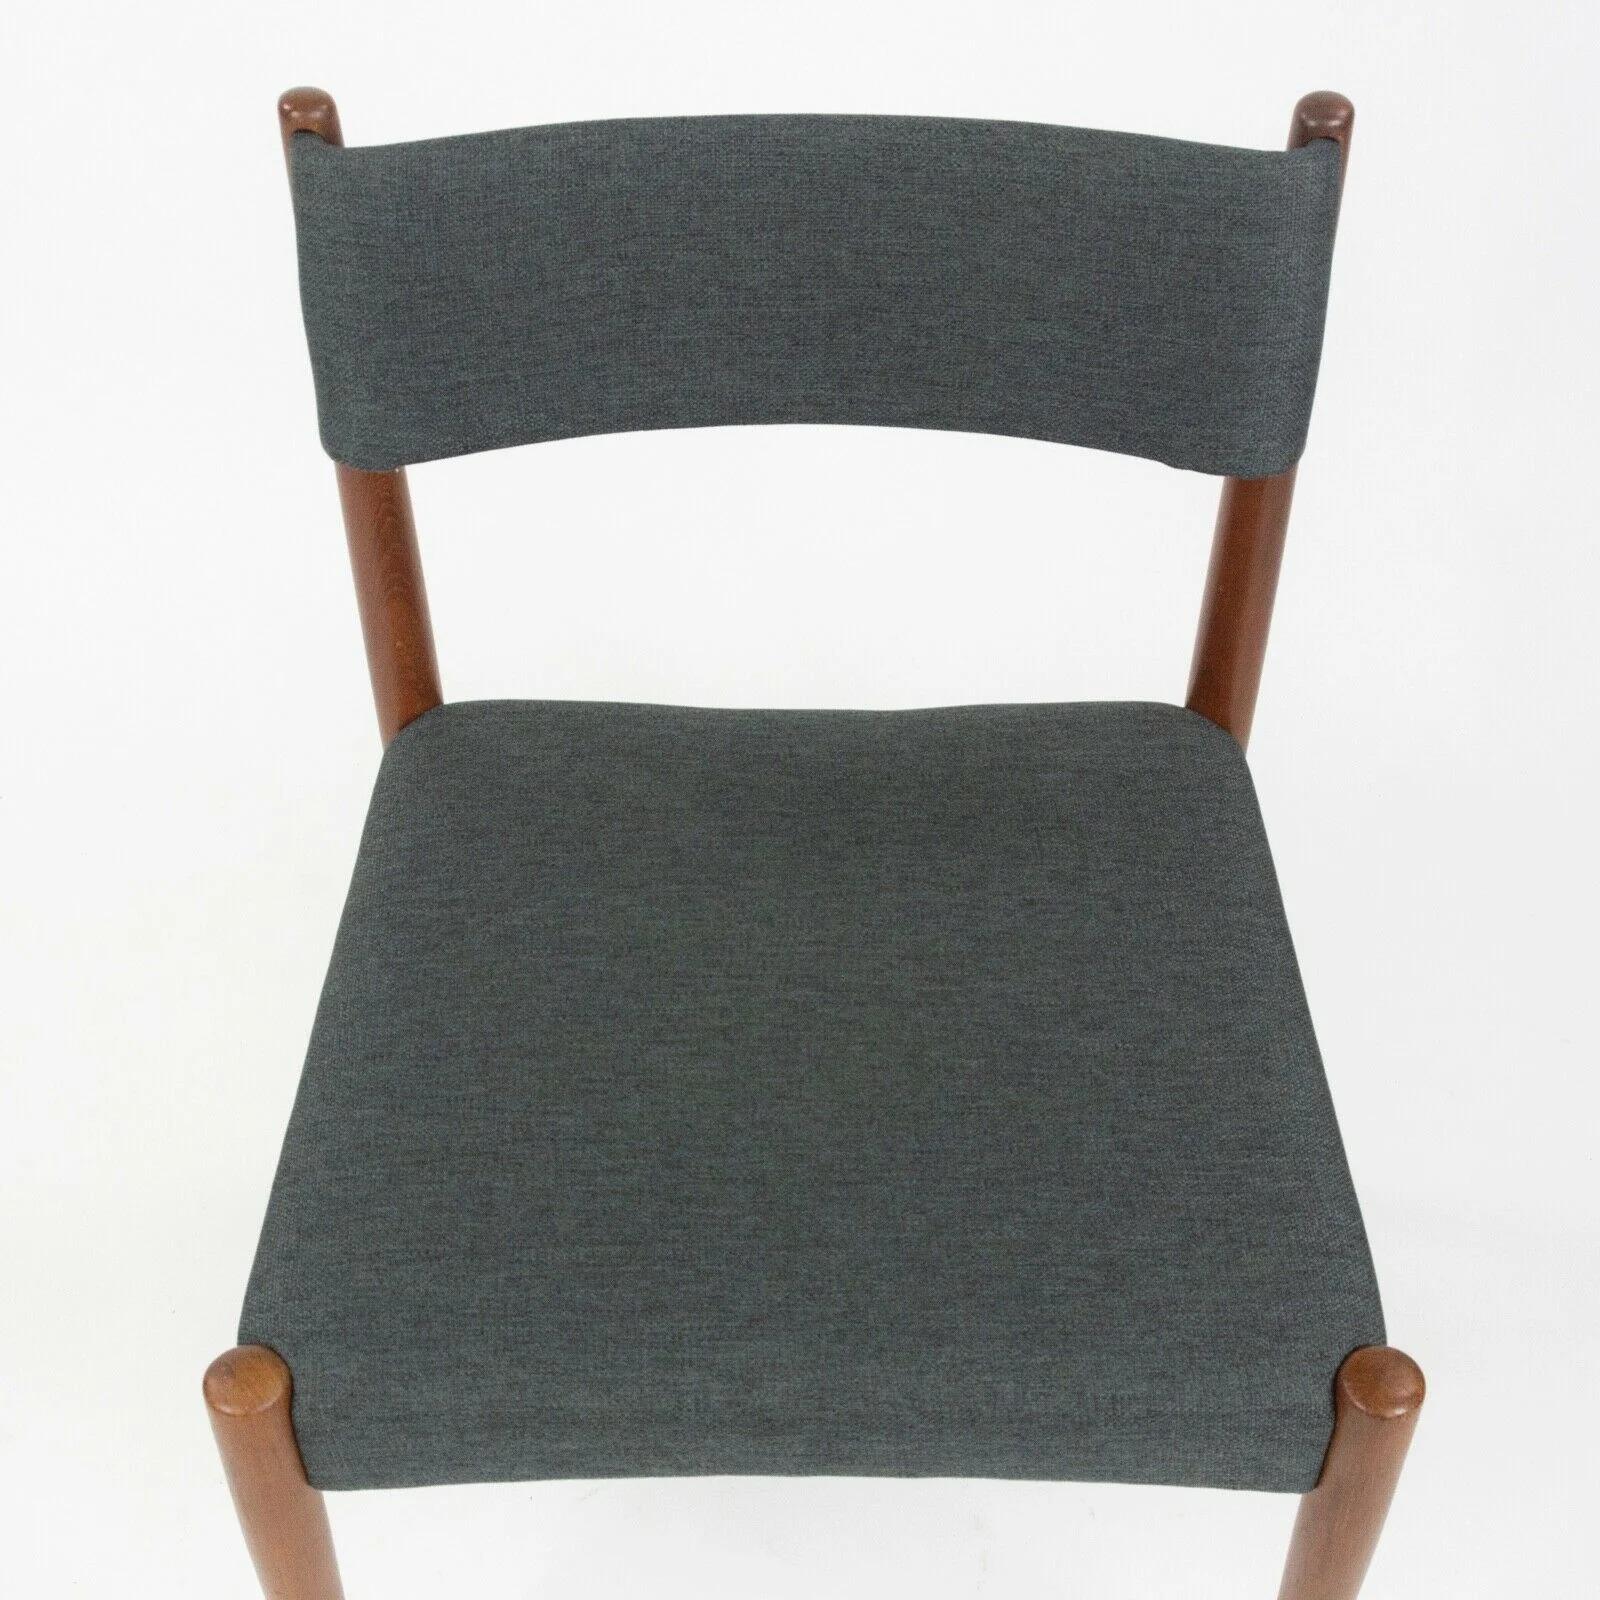 1960s Knud Faerch Bovenkamp Dining Chairs Netherlands New Upholstery Set of 5 For Sale 5